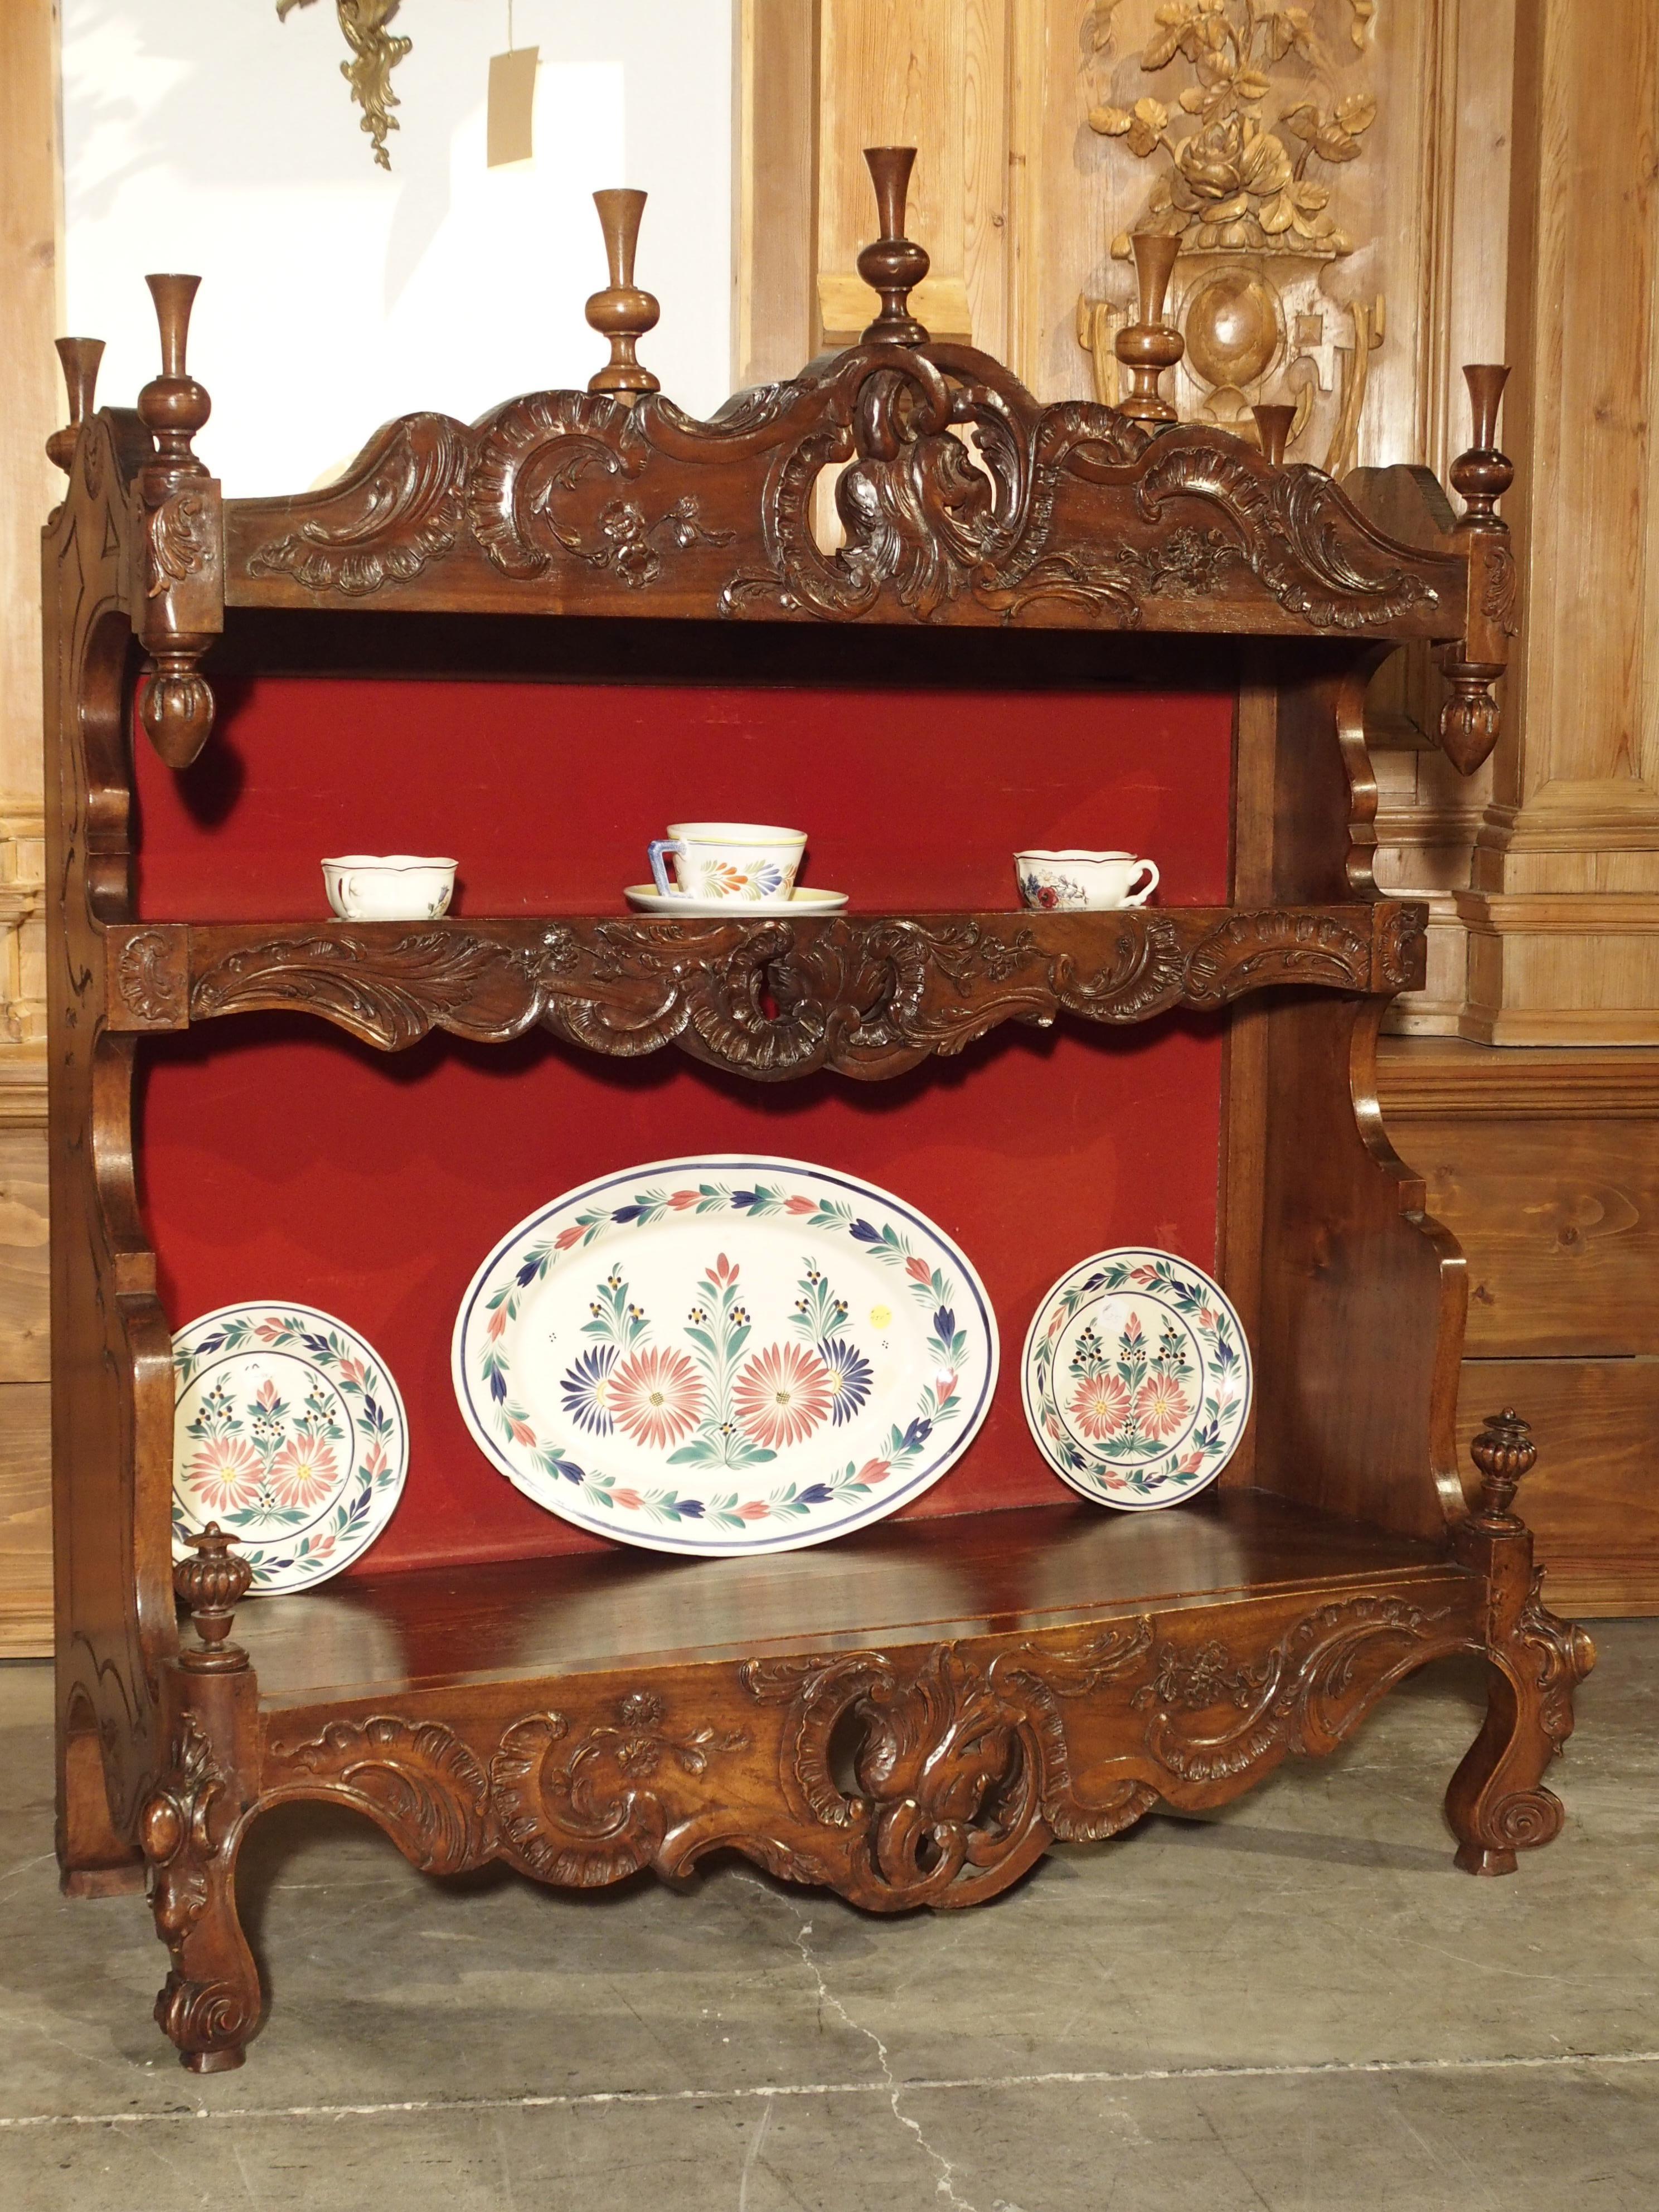 This charming antique French walnut wood estanier or standing plate rack is in the Louis XV style. These would have originally been used to holder pewter dishes and utensils, and the lower, larger shelf would have held pots and faience pieces. Two